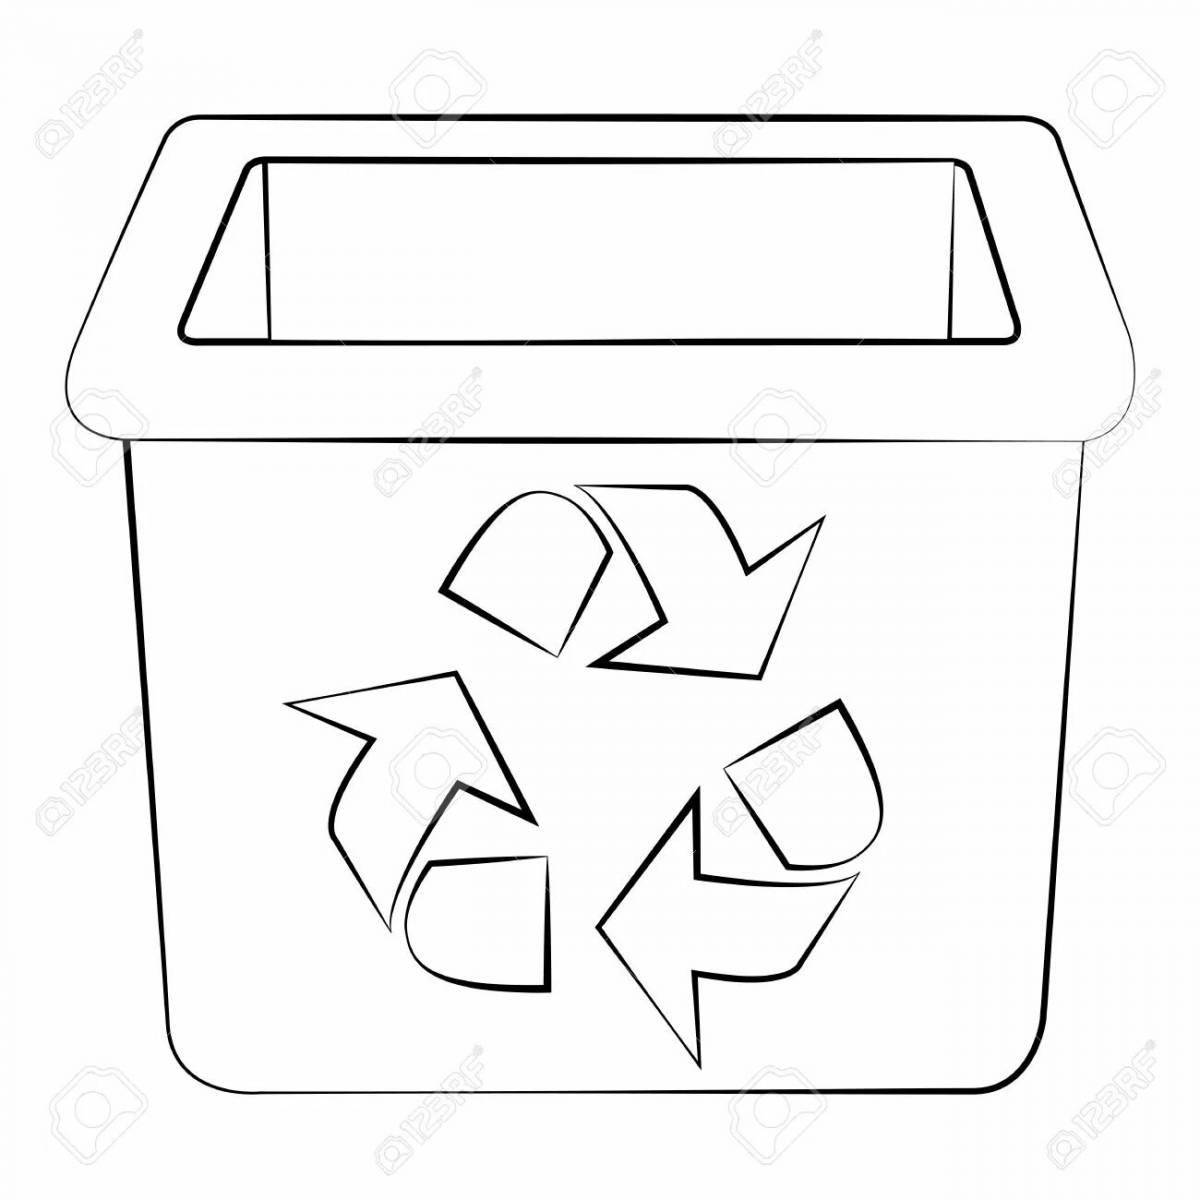 Happy trash can coloring page